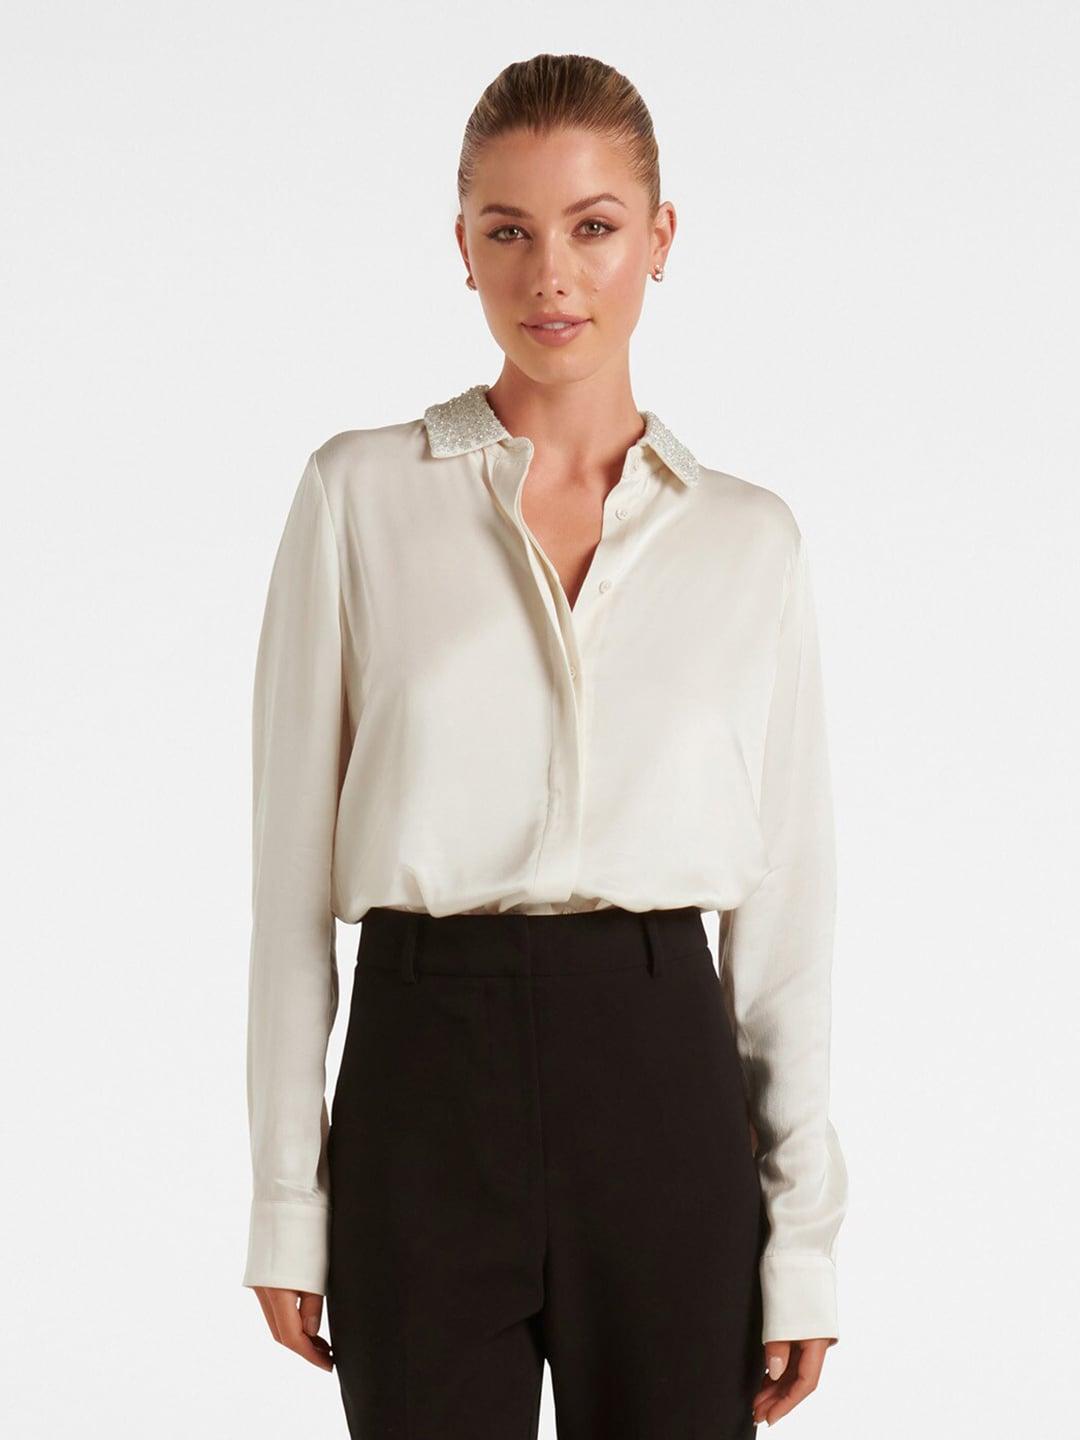 forever new embellished spread collar opaque formal satin shirt